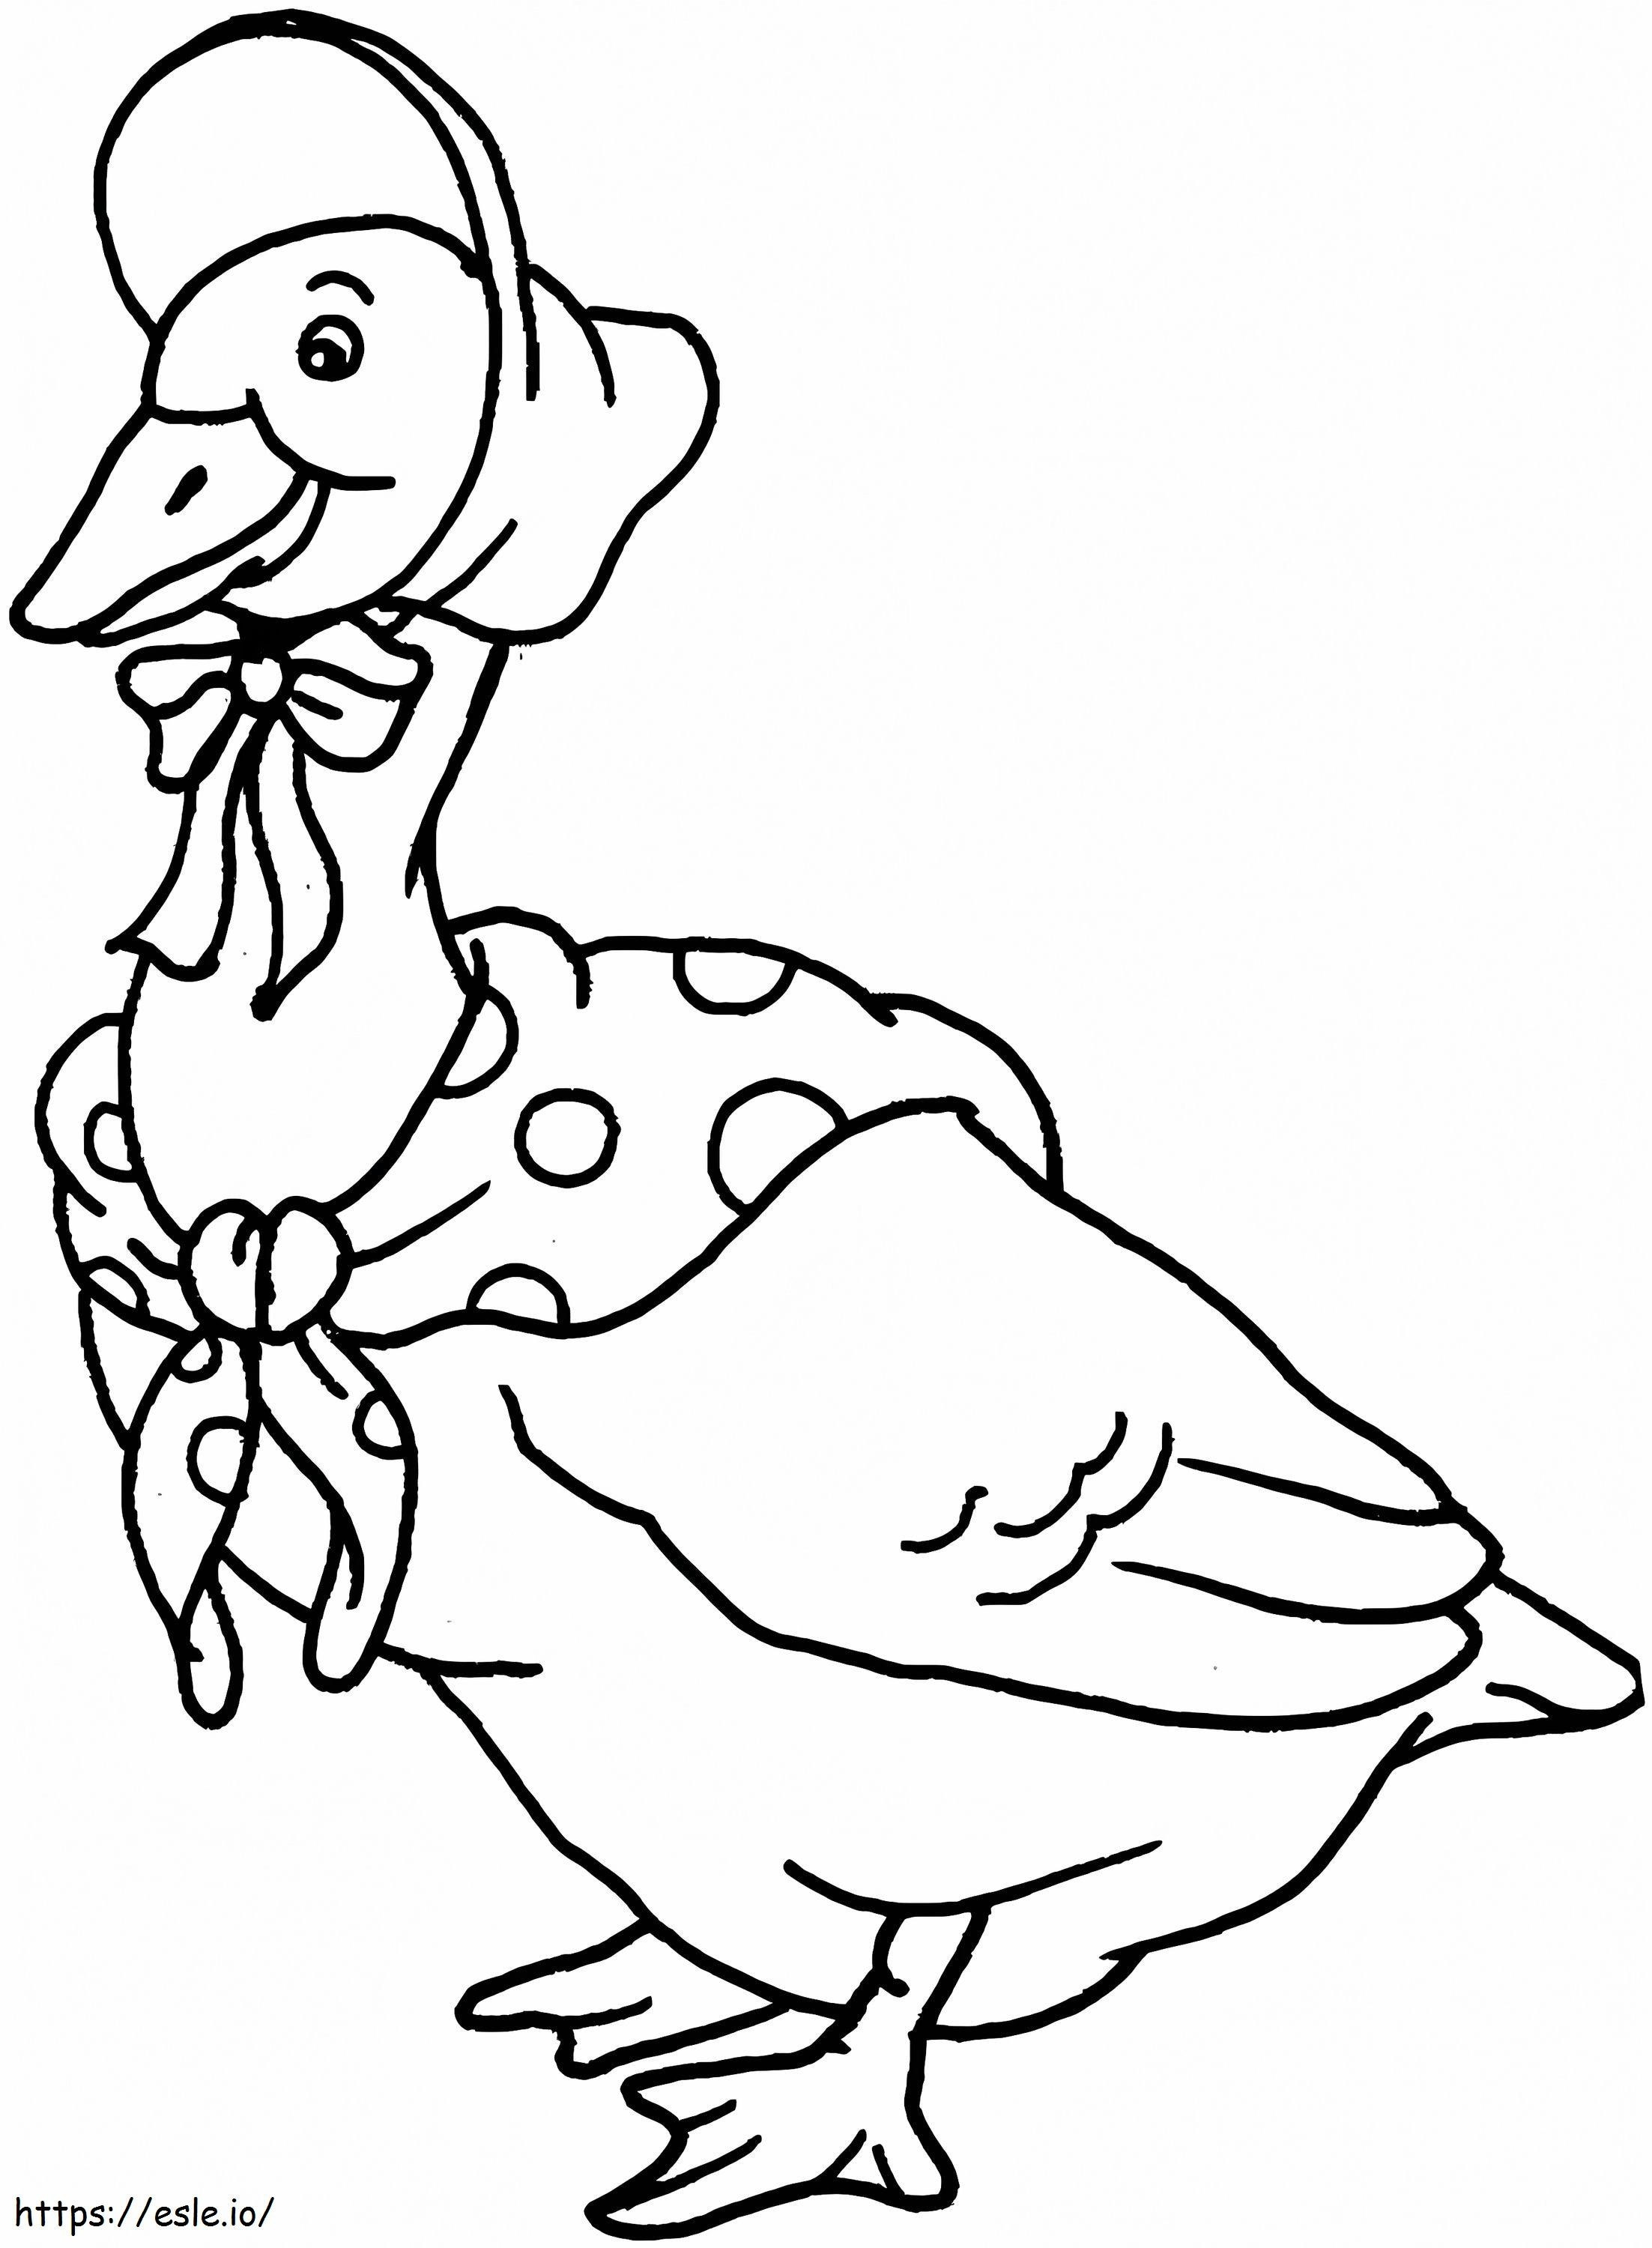 Goose Lady coloring page